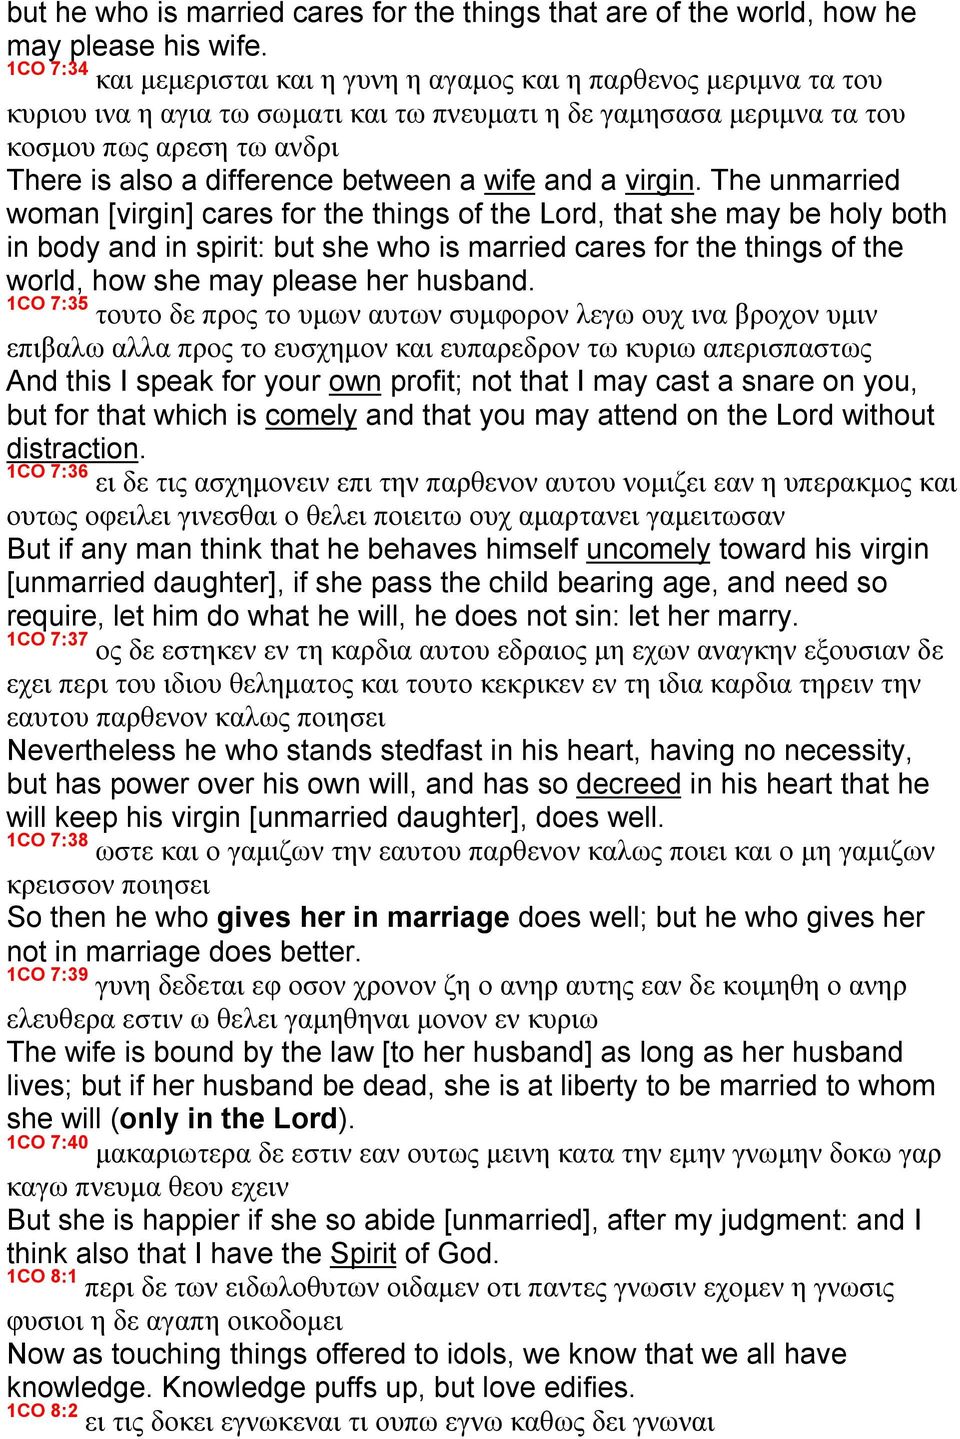 between a wife and a virgin.